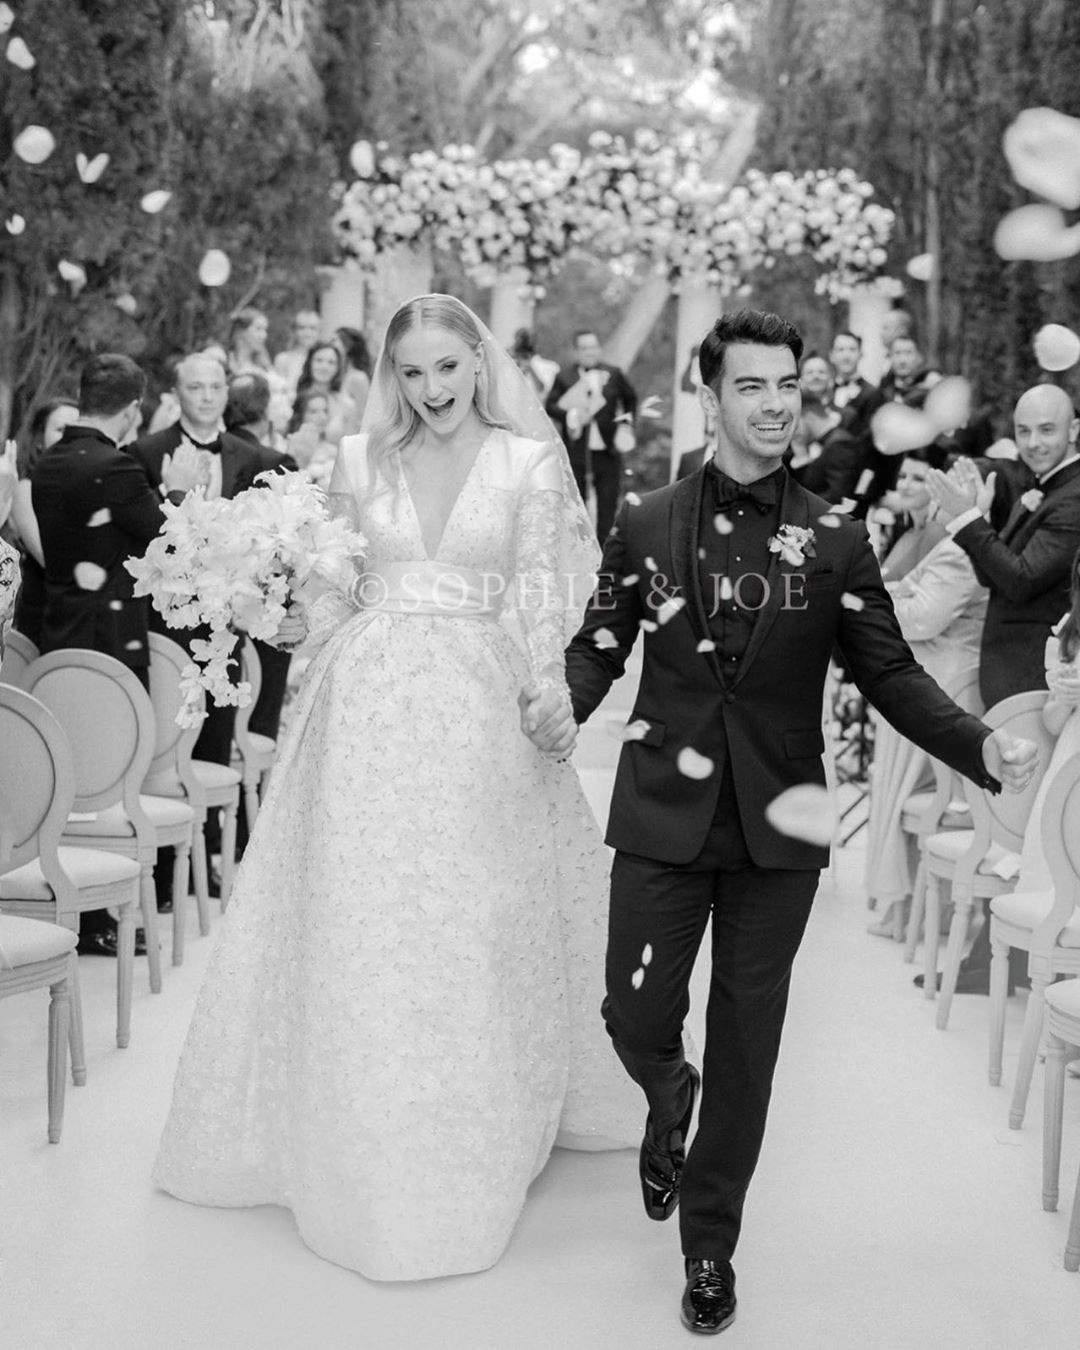 Sophie Turner and Joe Jonas' official wedding photo is as glamorous as you'd expect